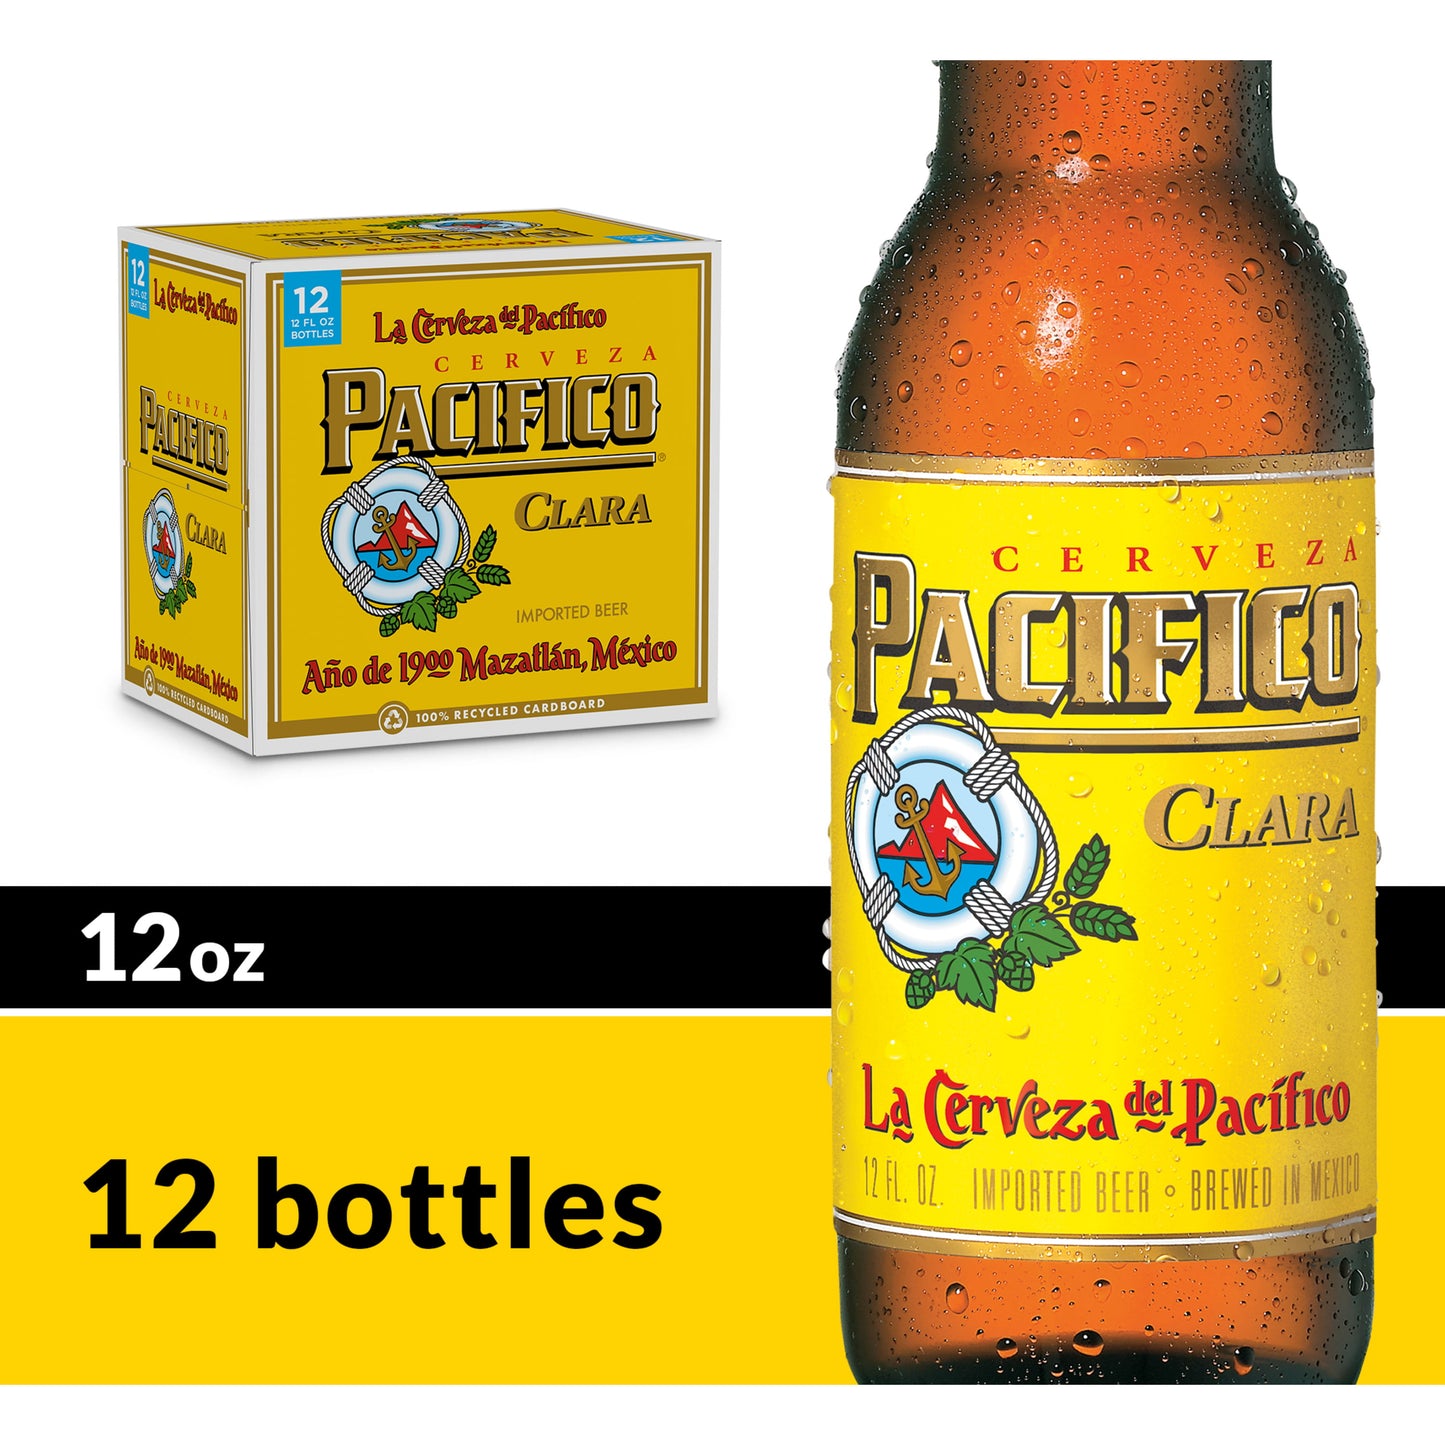 Pacifico Clara Mexican Lager Import Beer, 12 Pack Beer, 12 fl oz Bottles, 4.4% ABV